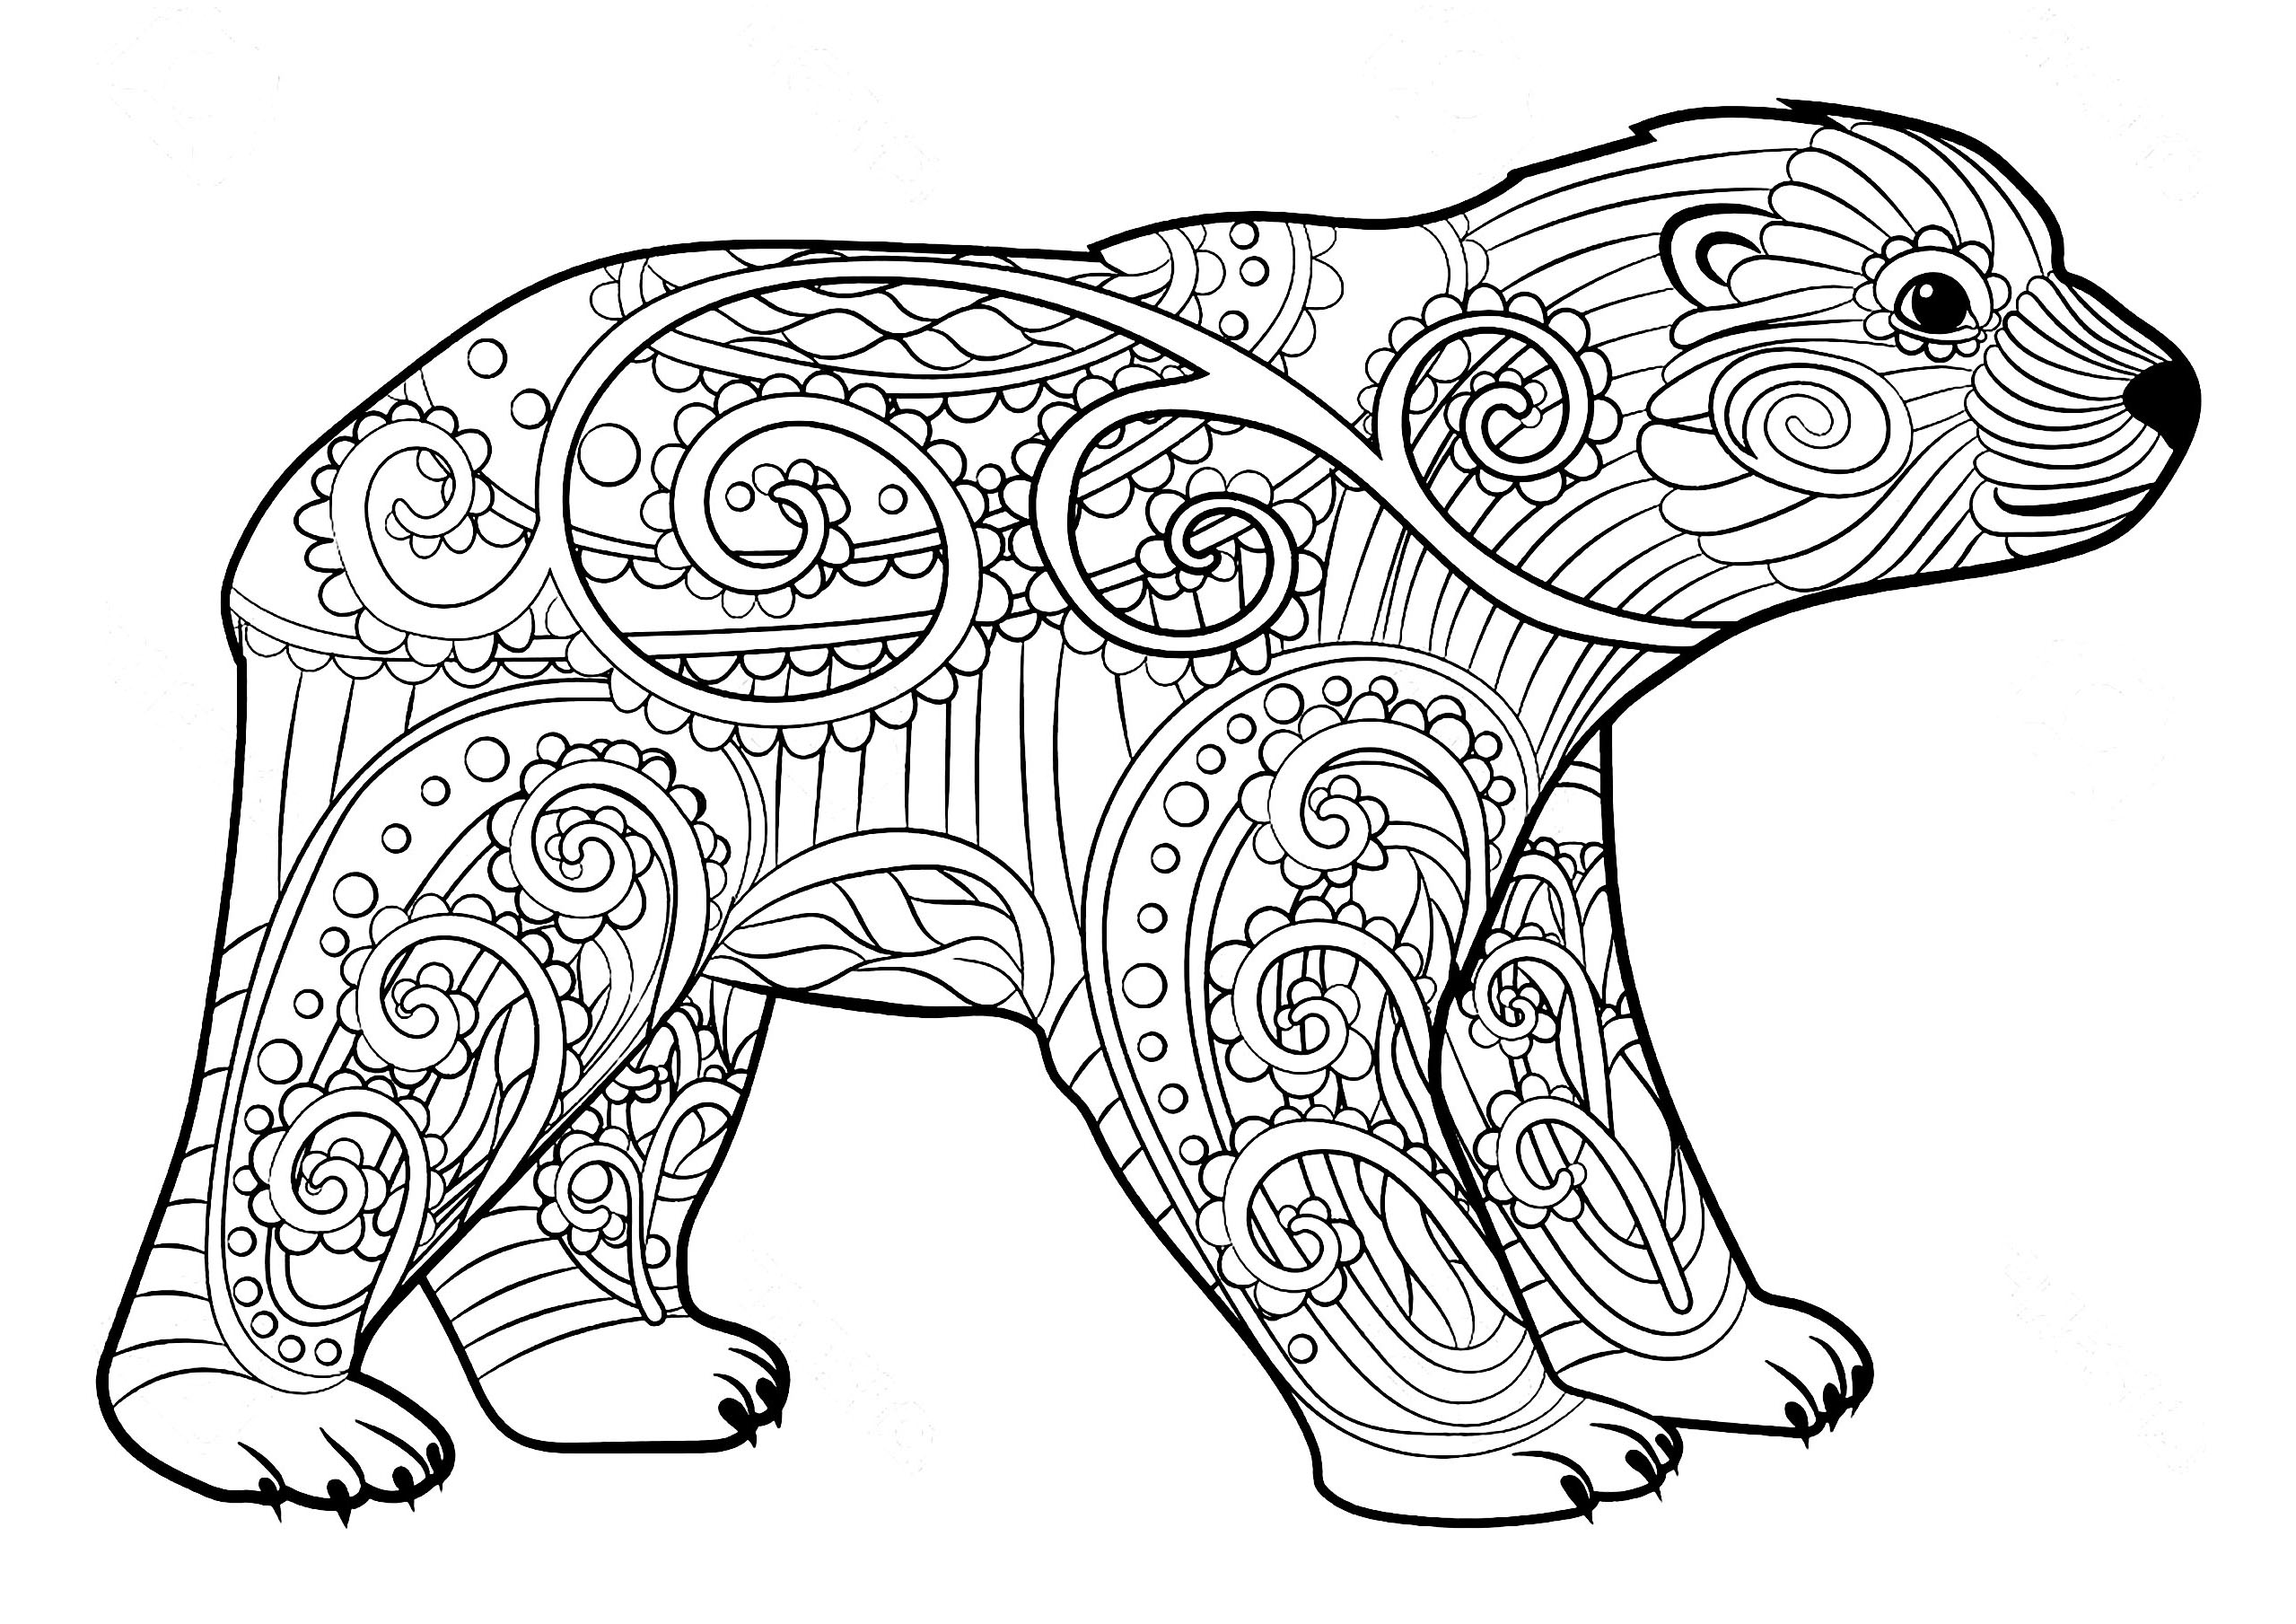 Bears to color for kids - Bears Kids Coloring Pages